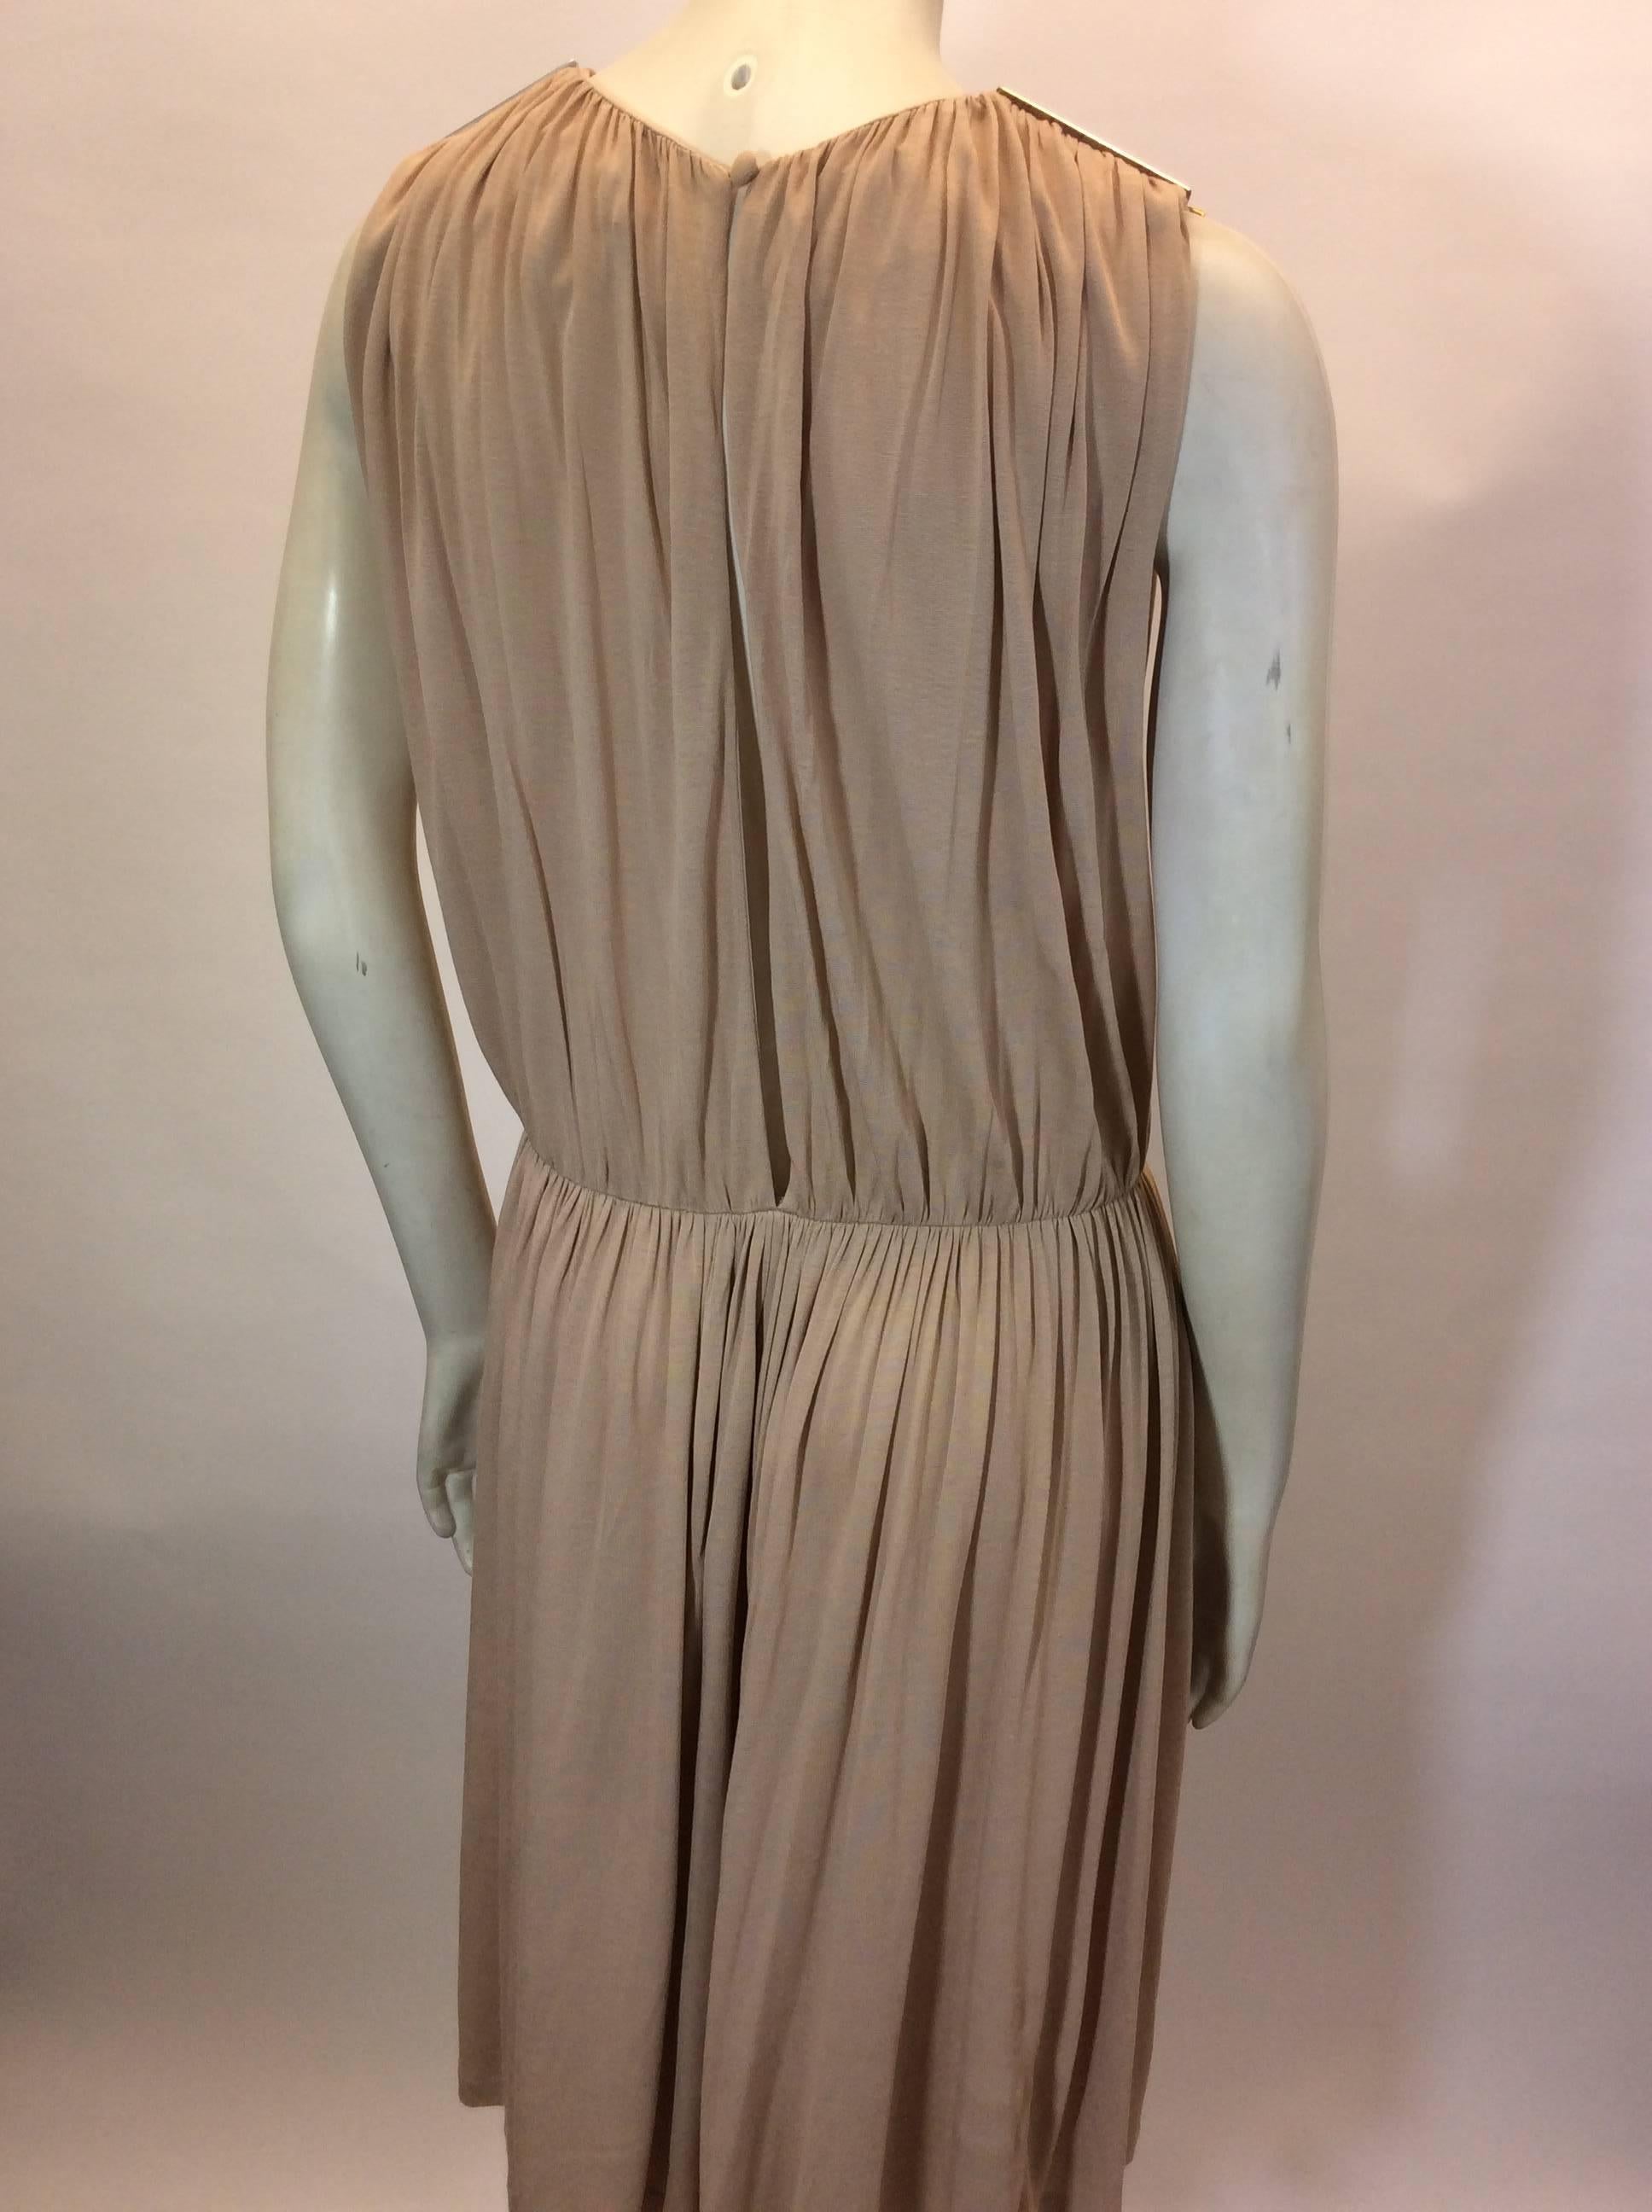 Chloe Taupe Longline Romper with Open Back In Excellent Condition For Sale In Narberth, PA